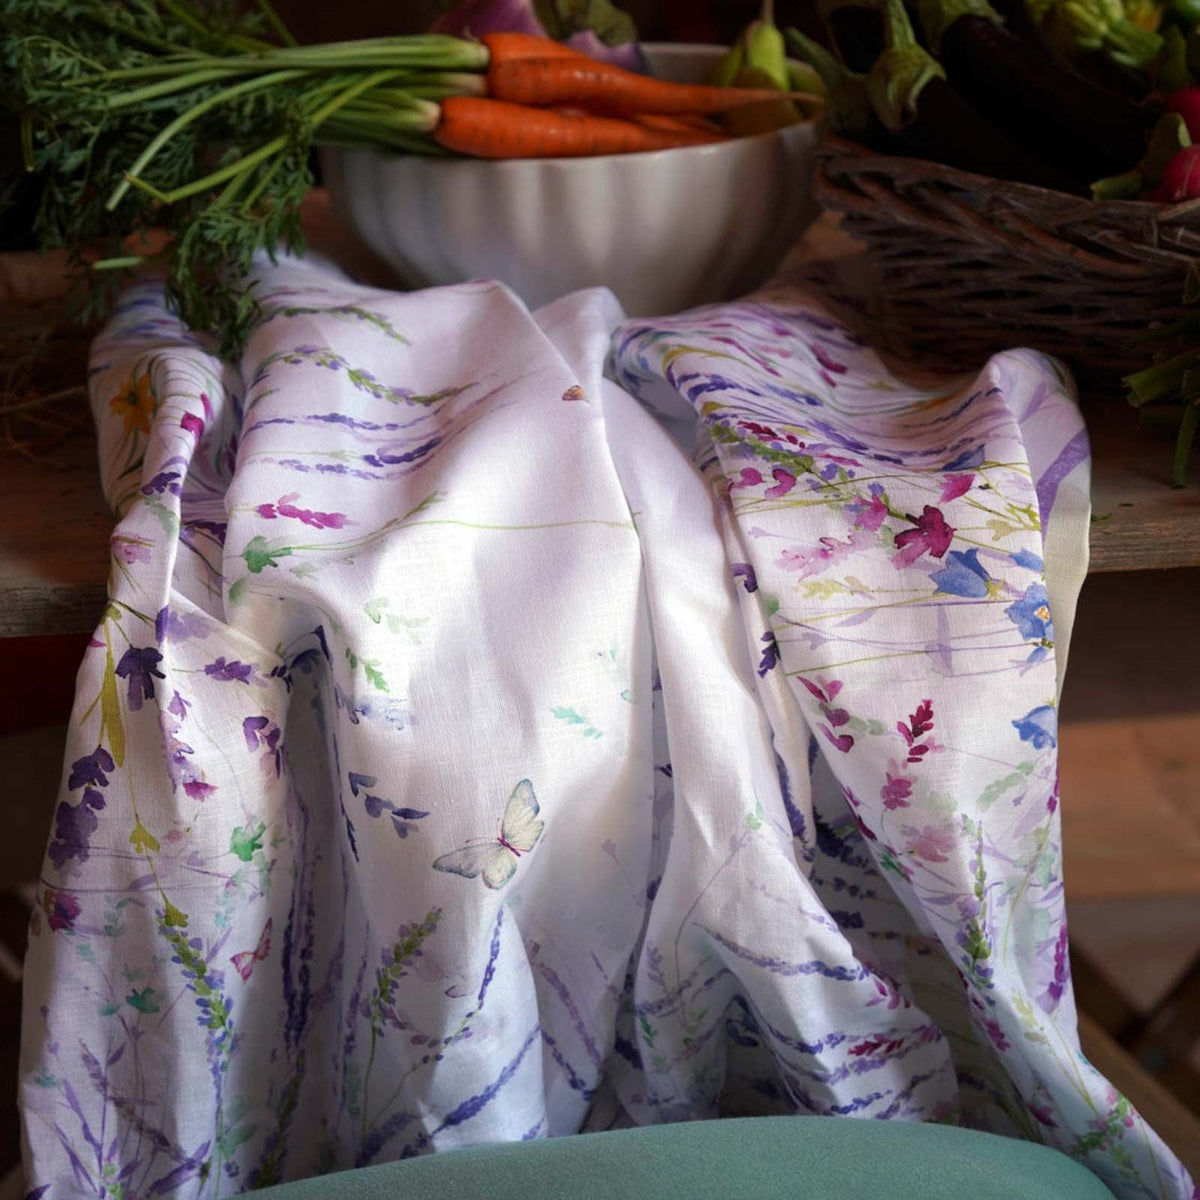 On a Meadow Linen Table Runner, a wildflower TTT blanket is beautifully displayed next to a bowl of carrots.